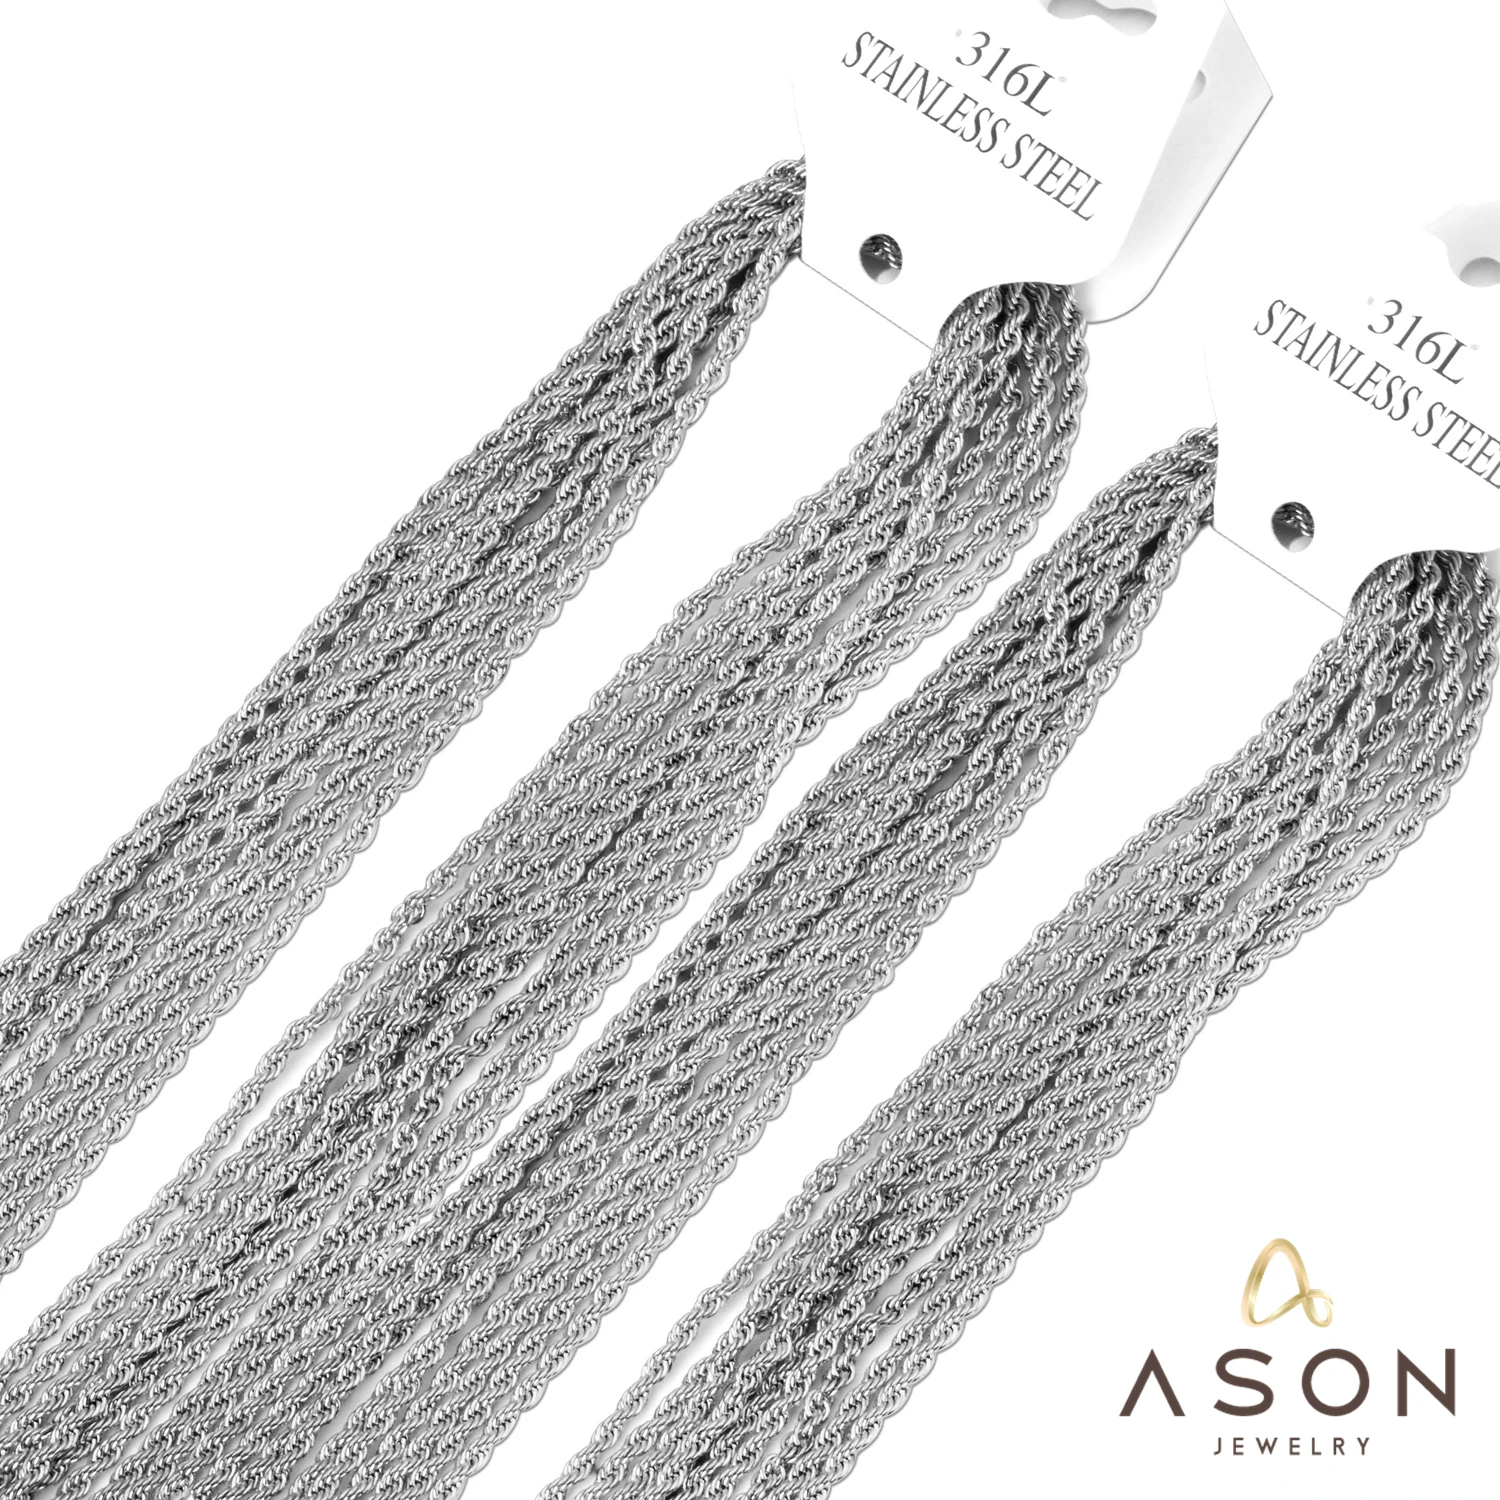 

ASONSTEEL 10pcs Width 2mm Stainless Steel Rope Chain Necklace Statement Swag 316L Stainless Steel Twisted Necklace Steel Chain